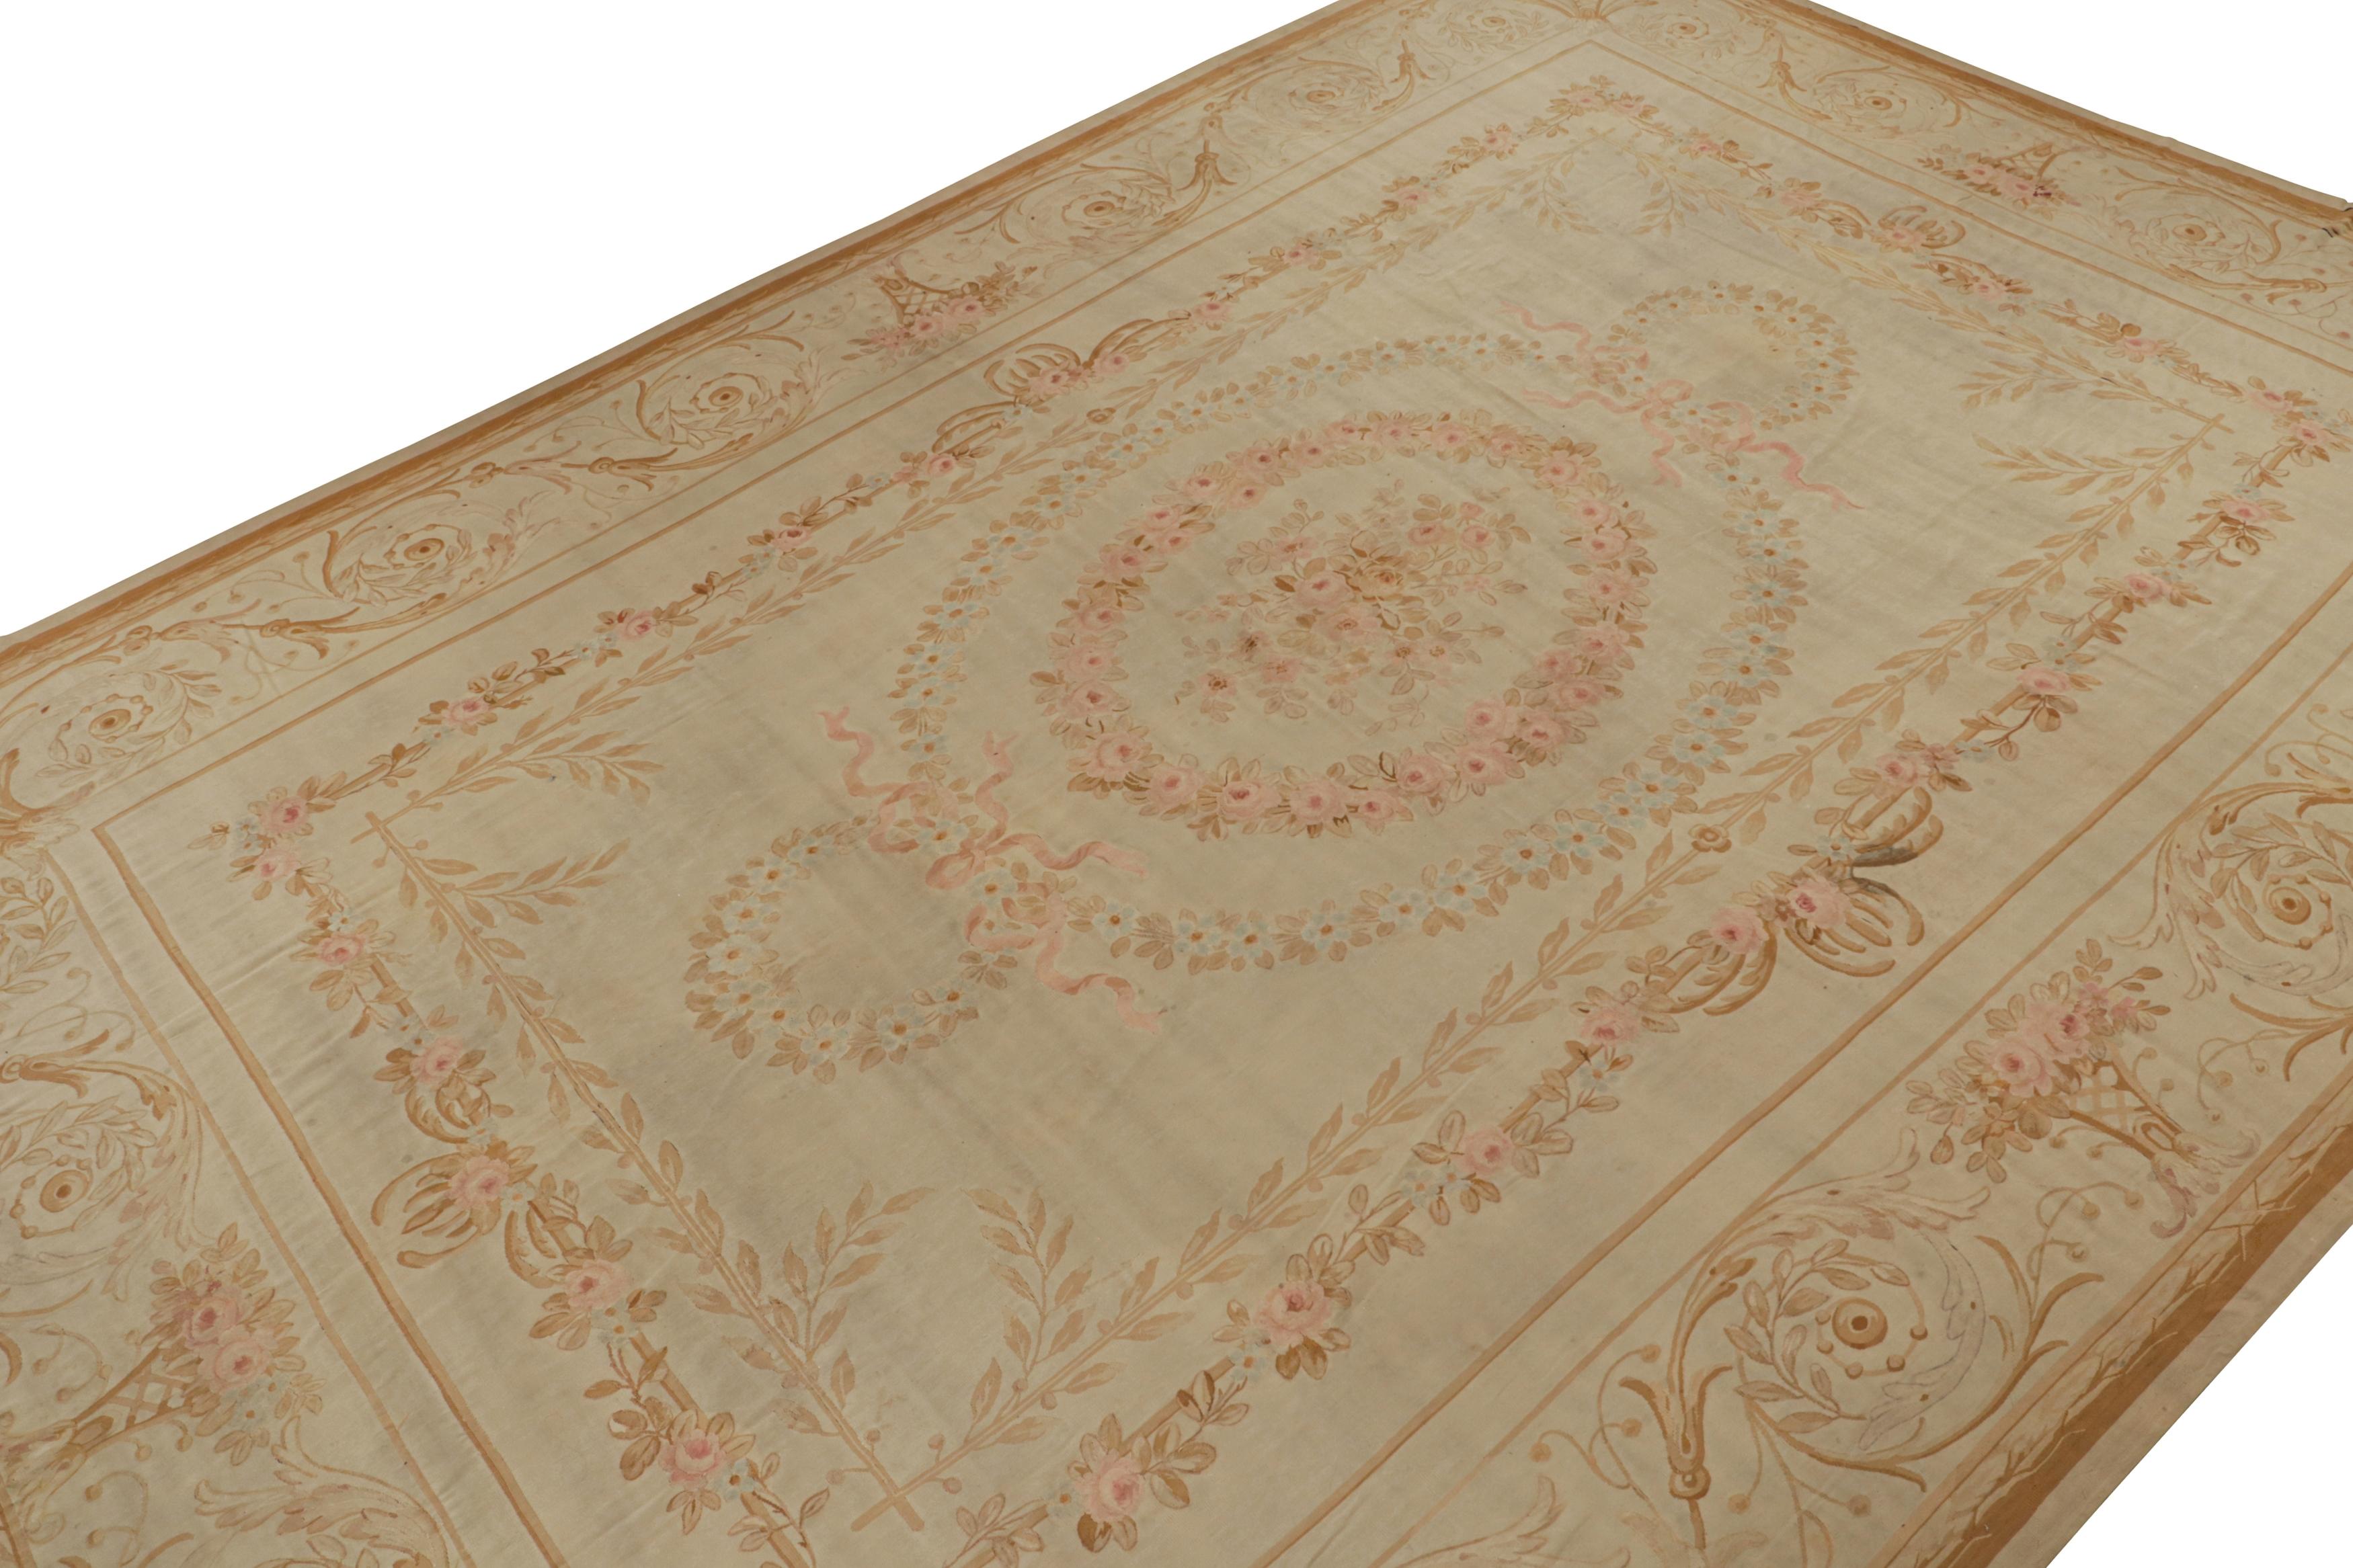 Handwoven in wool circa 1890-1900, this 13x20 antique Aubusson flatweave and oversized rug is an extremely rare turn-of-the-century curation. Its design enjoys beige and cream undertones, with light blue and pink floral patterns around several large